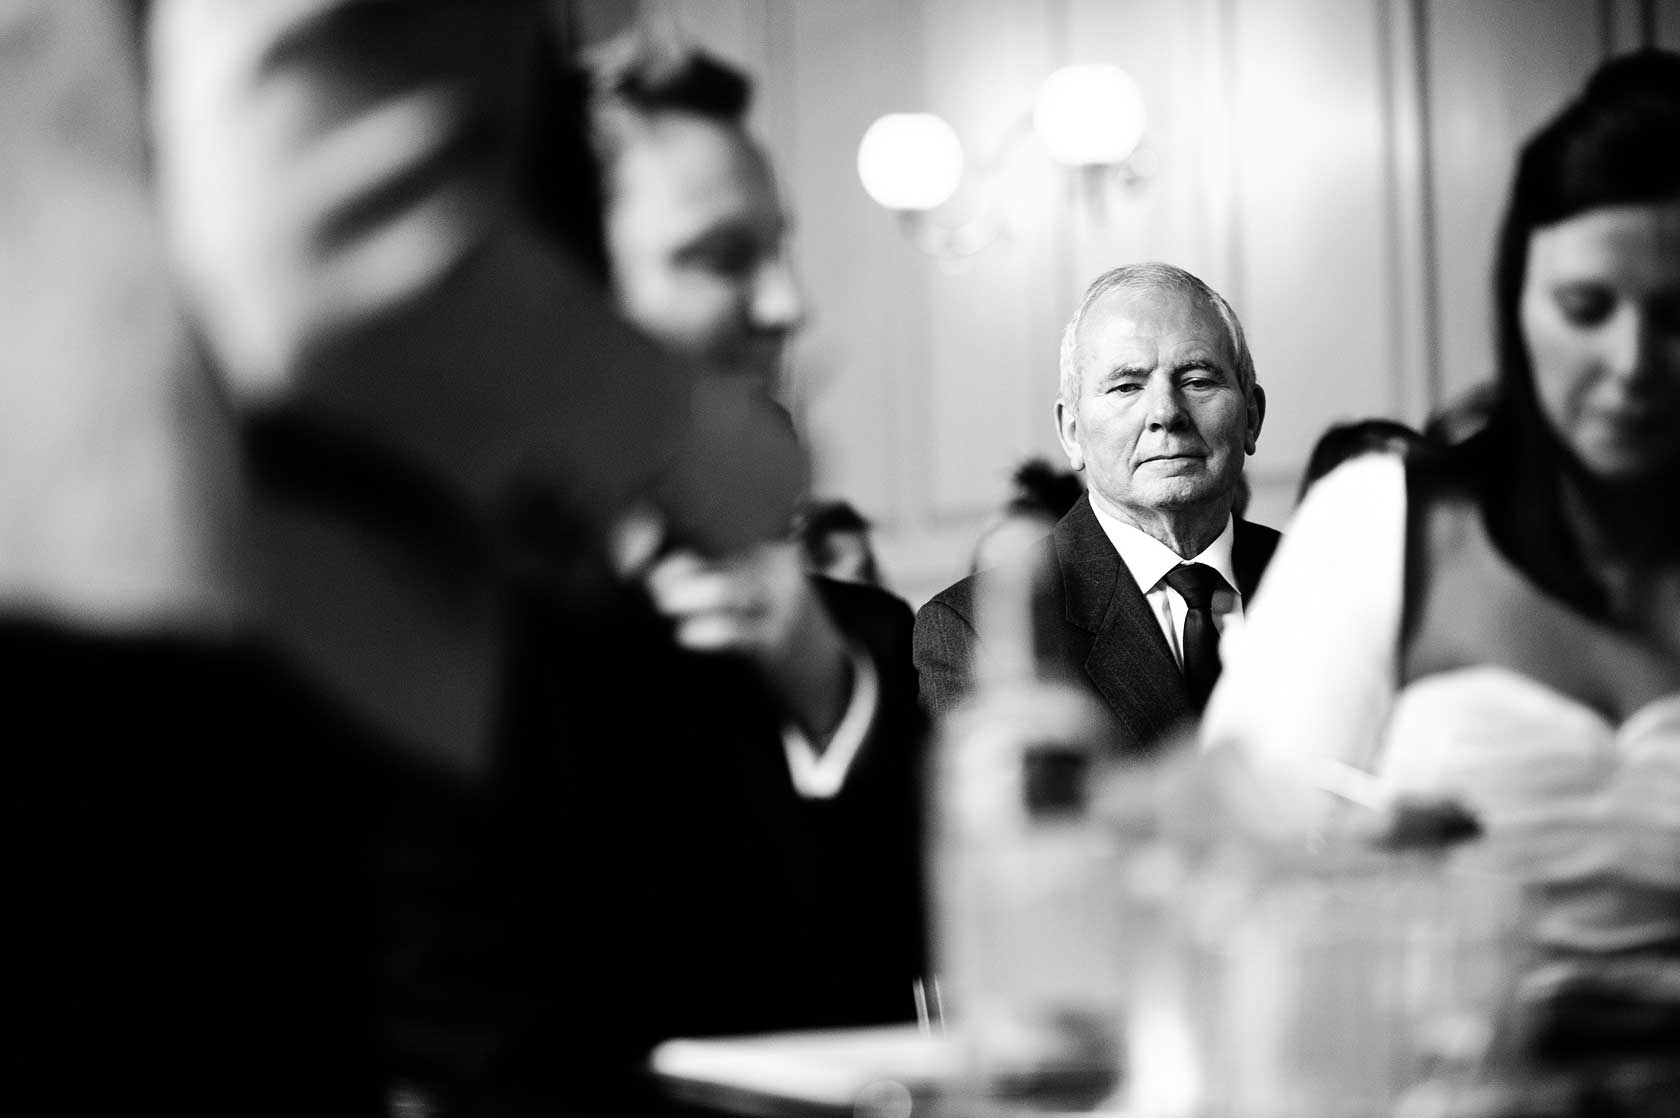 Reportage Wedding Photography at Gosfield Hall